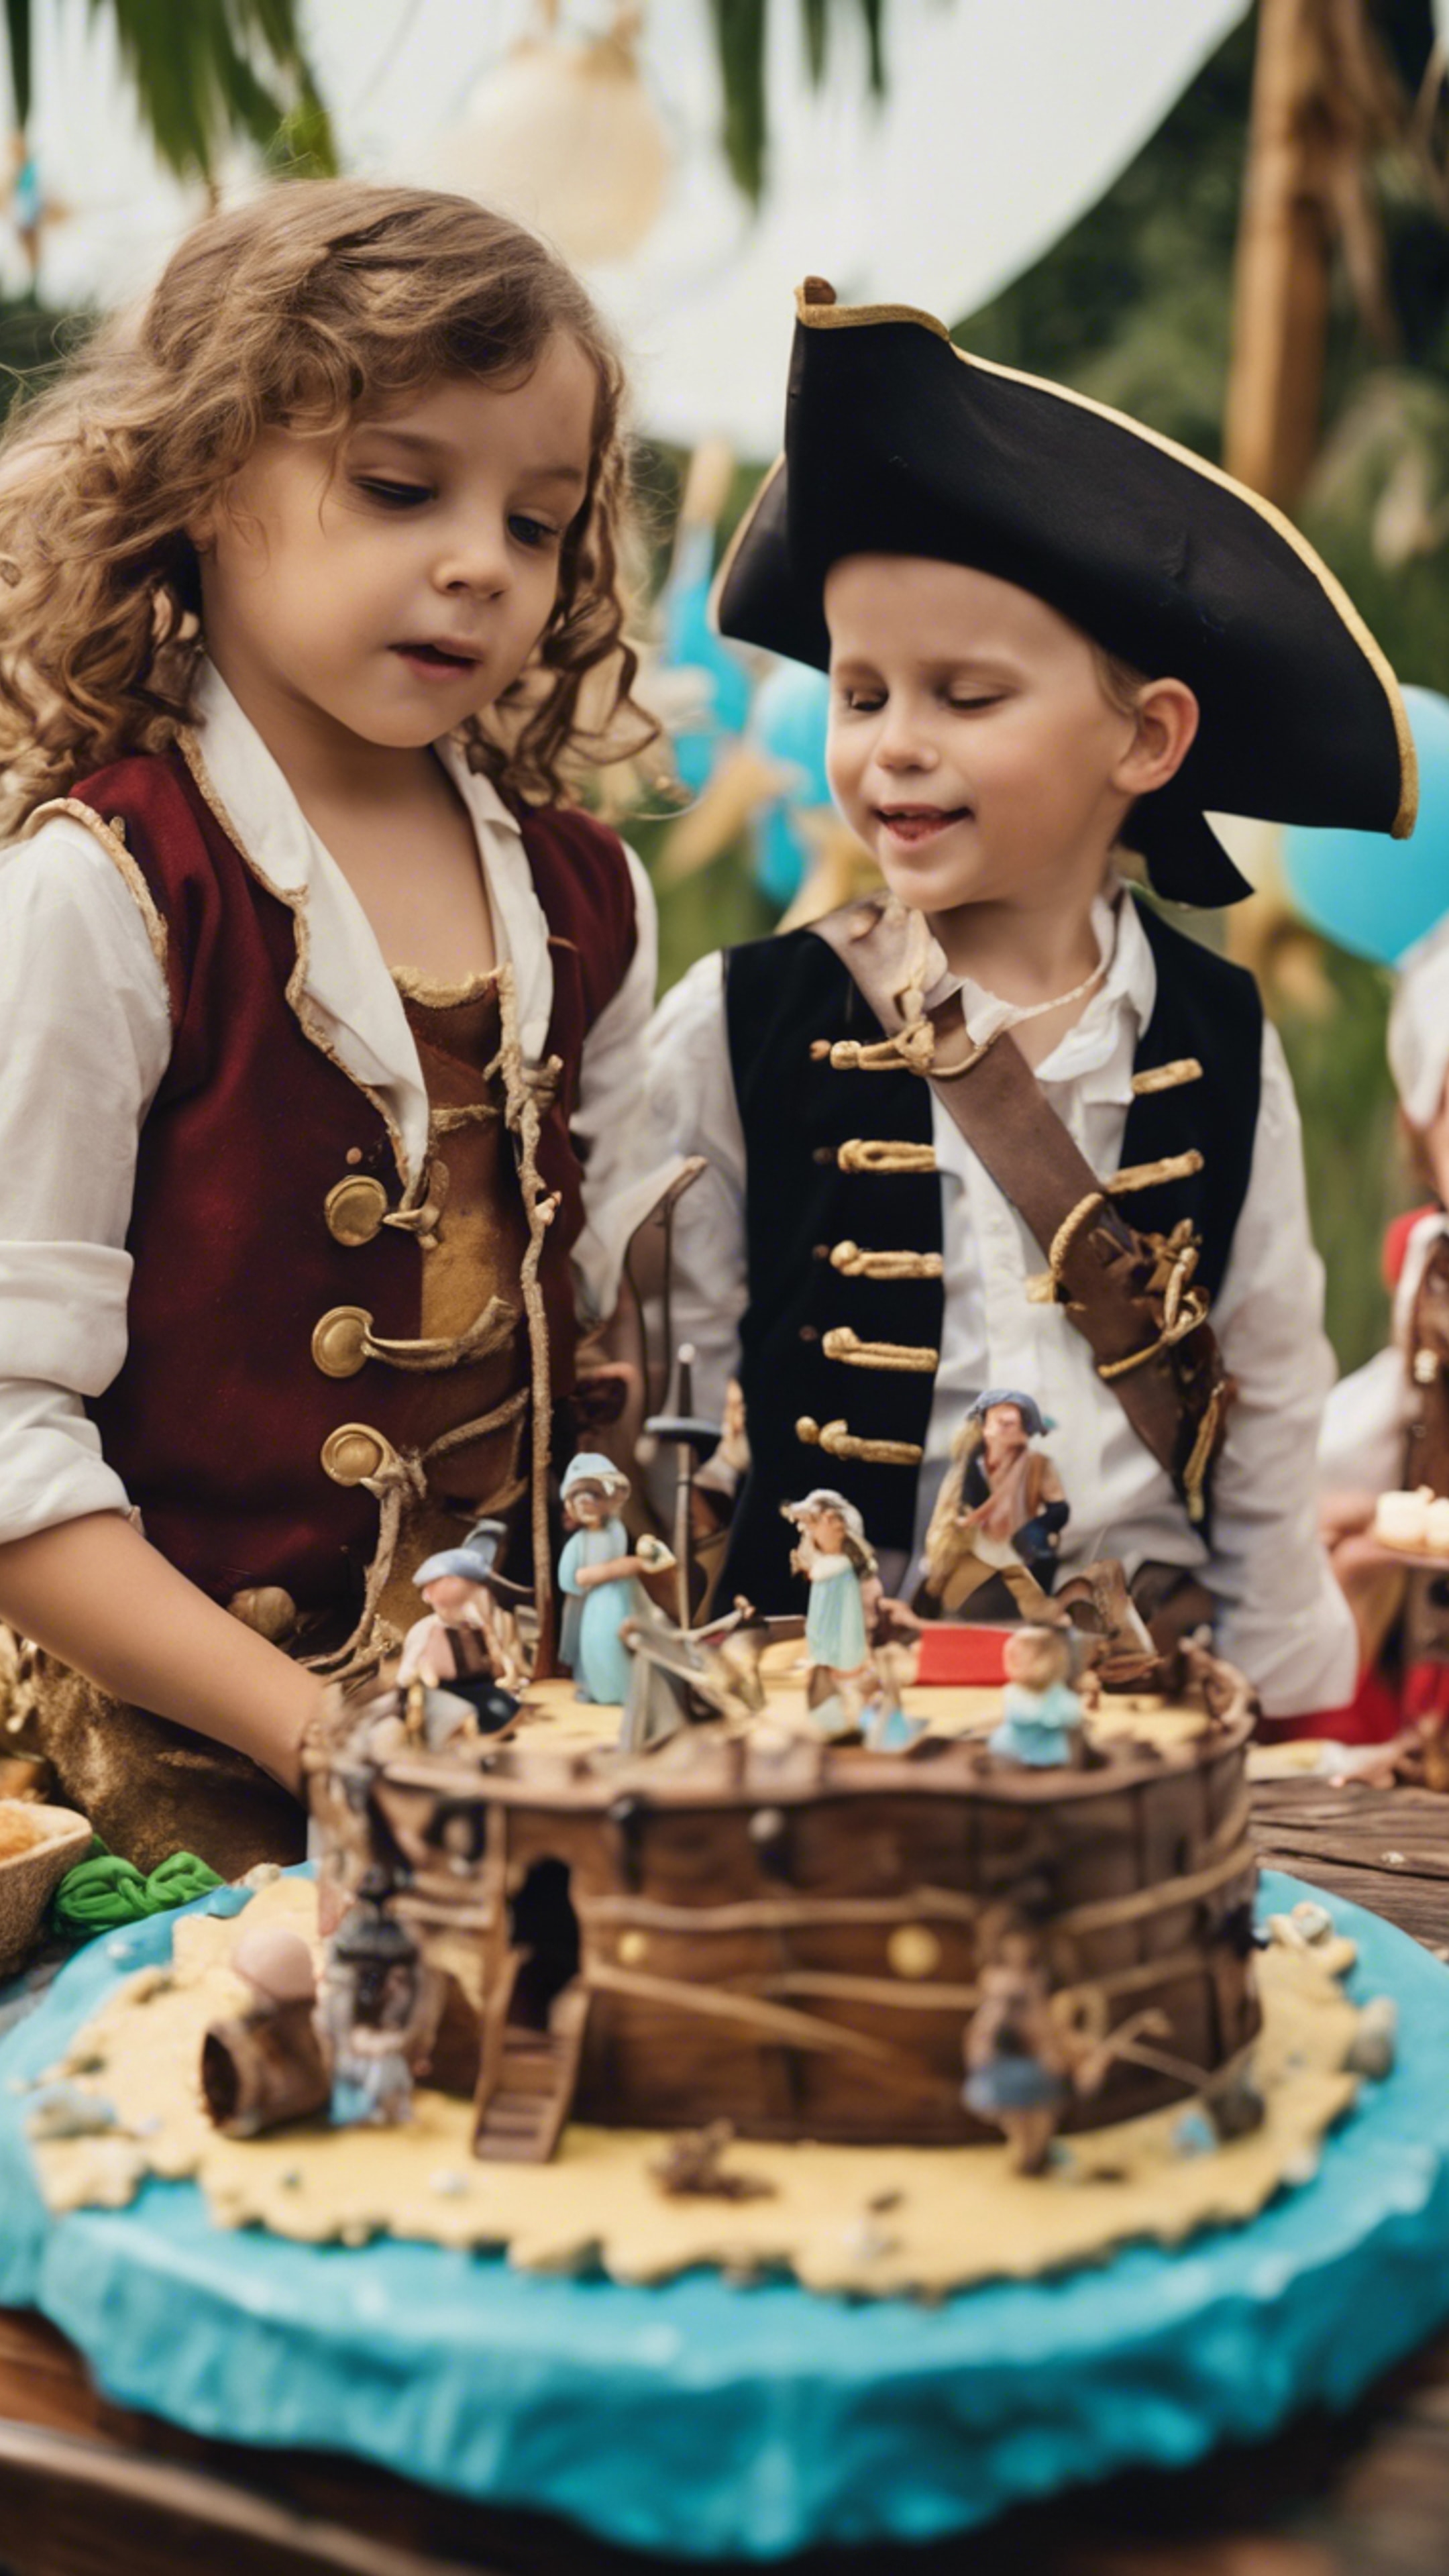 Children's pirate-themed birthday party with a treasure map, pirate ship cake and kids dressed as pirates. Tapet[fc1a6e05b86643309d7a]